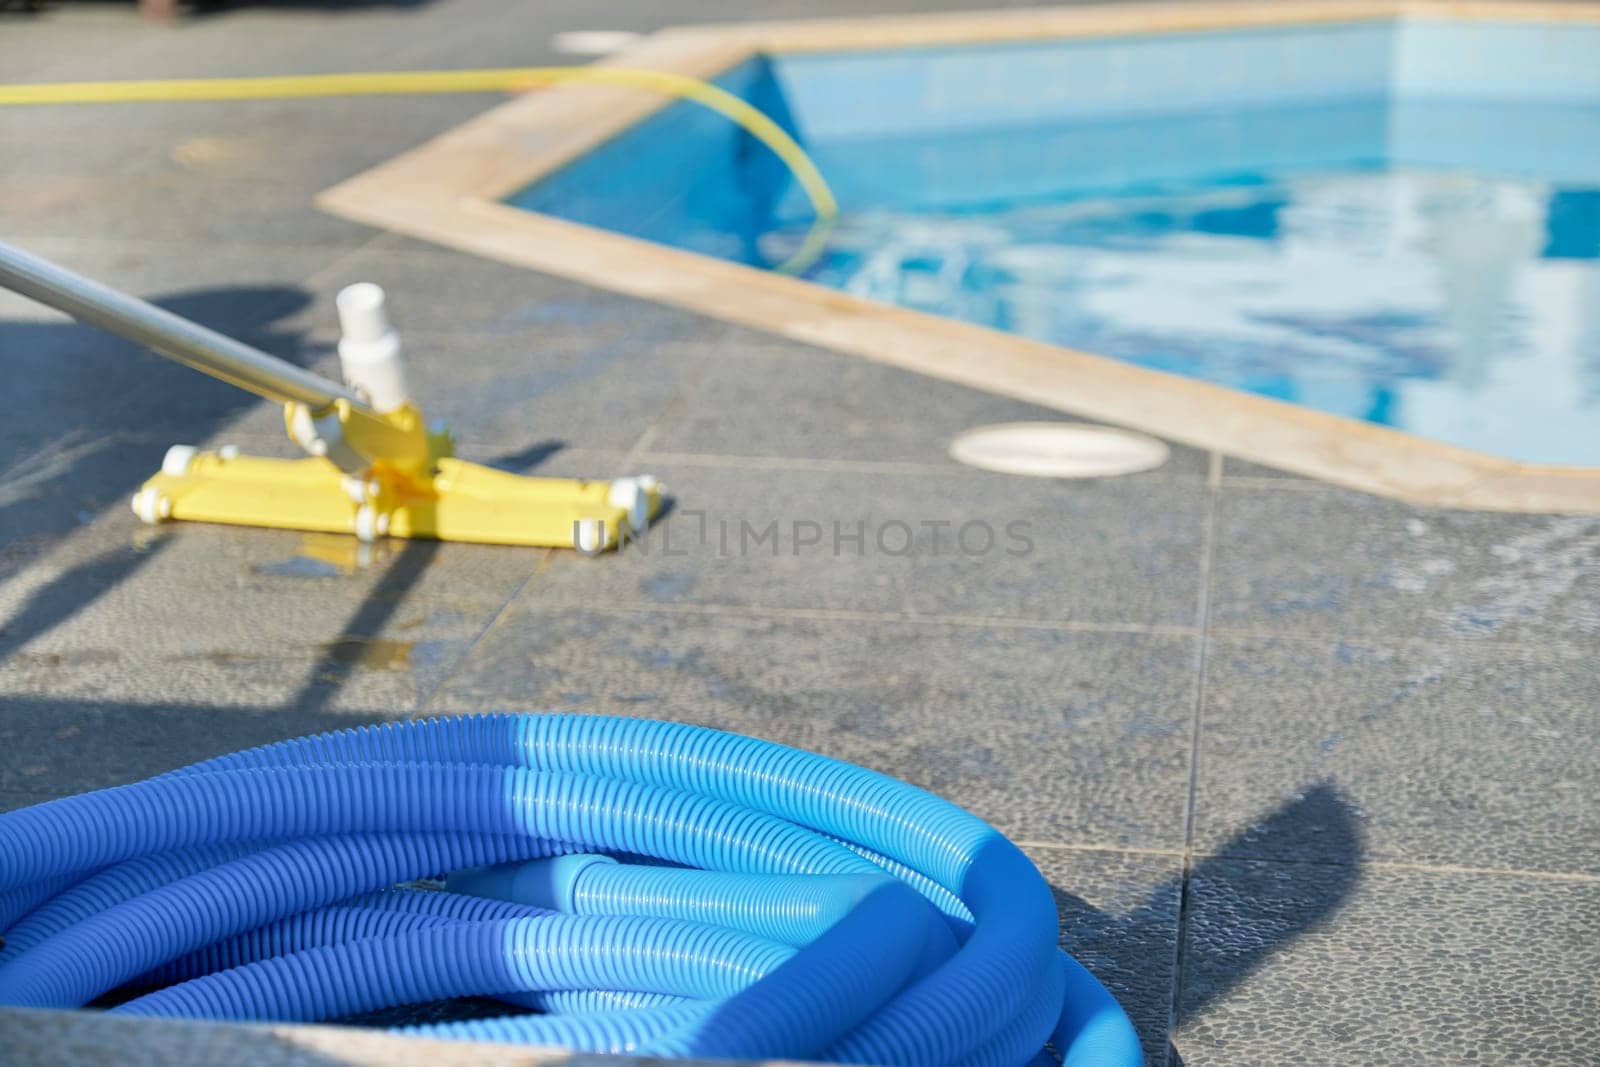 Water vacuum cleaner for cleaning the pool. Details of cleaner near an outdoor pool, nobody